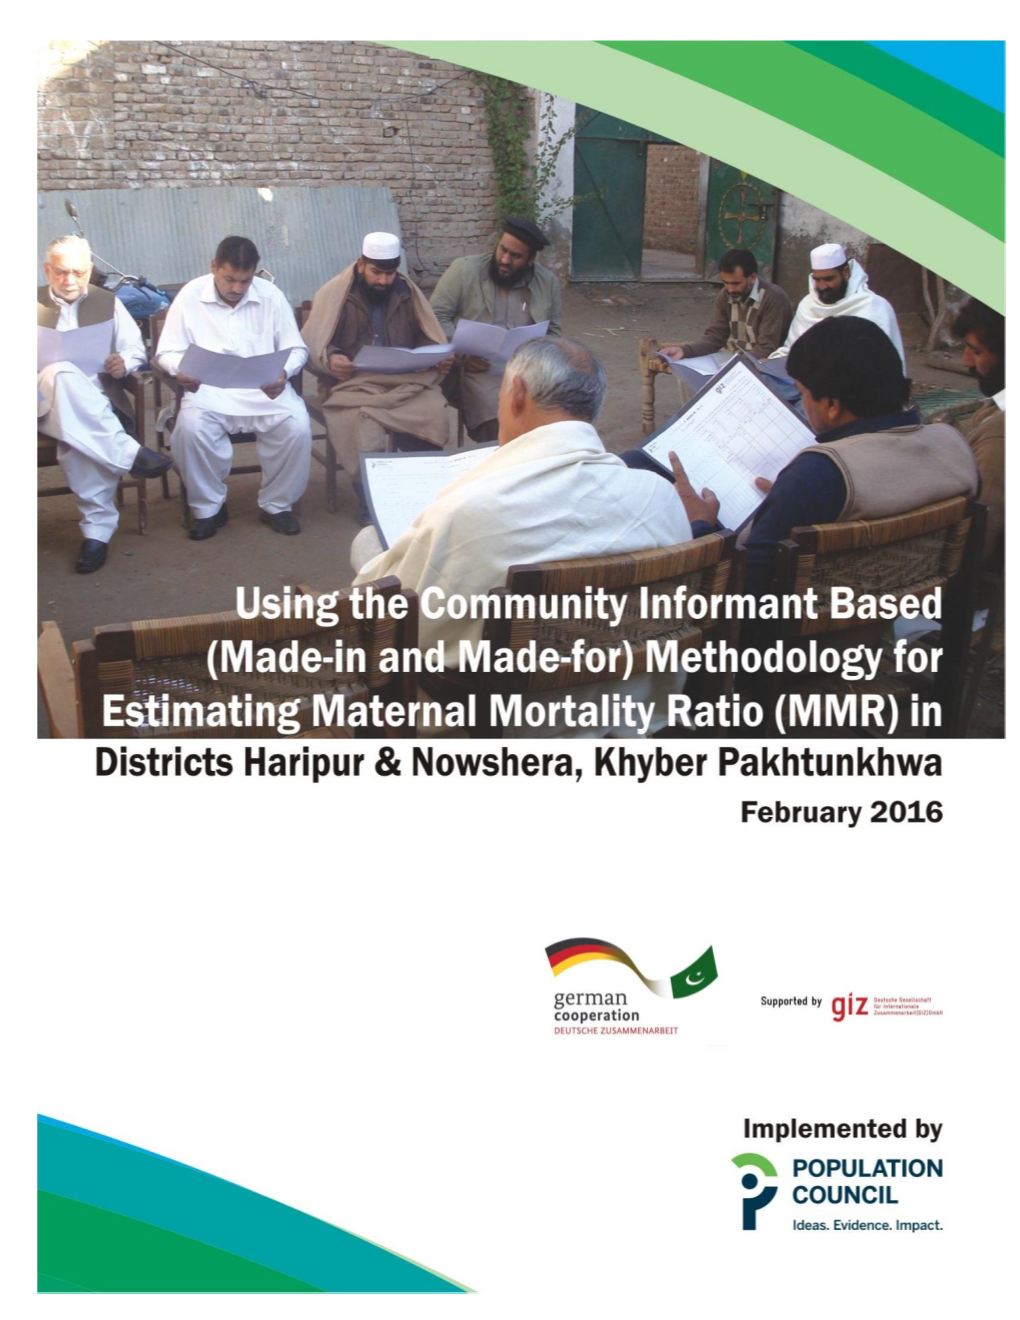 MMR) in Districts Haripur and Nowshera, Khyber Pakhtunkhwa